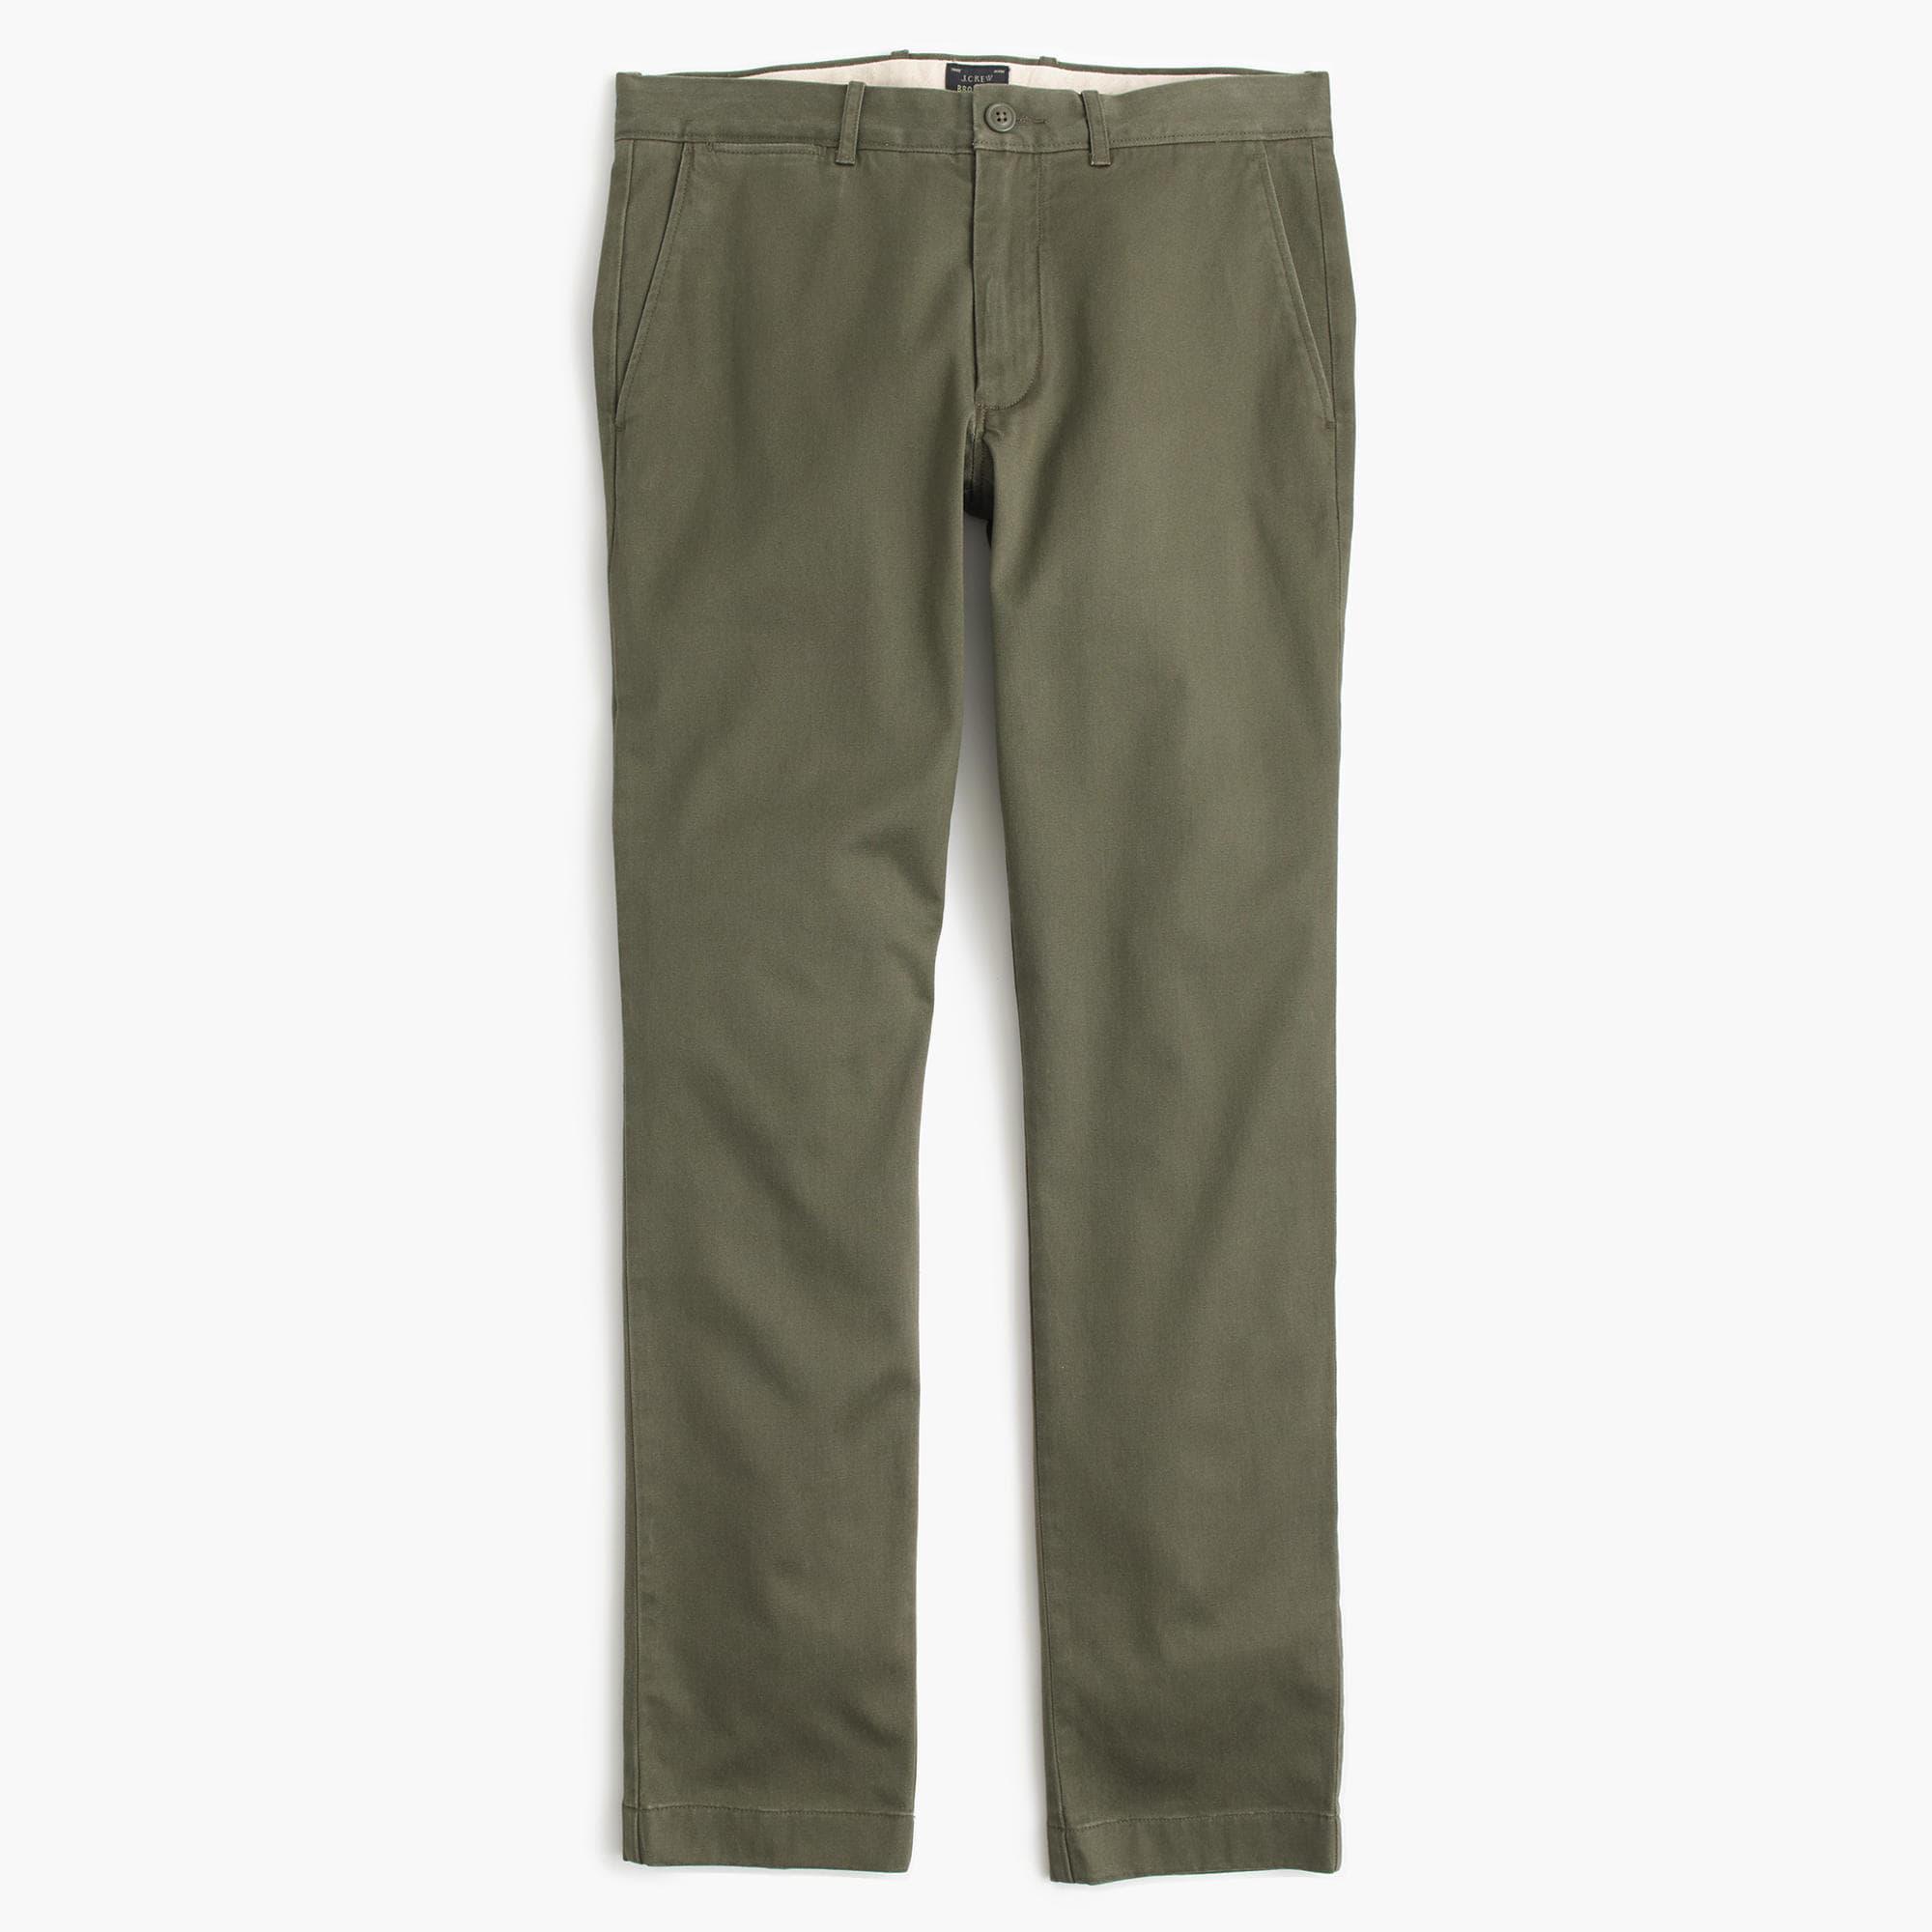 J.Crew Stretch Chino Pant In 770 Straight Fit in Green for Men - Lyst